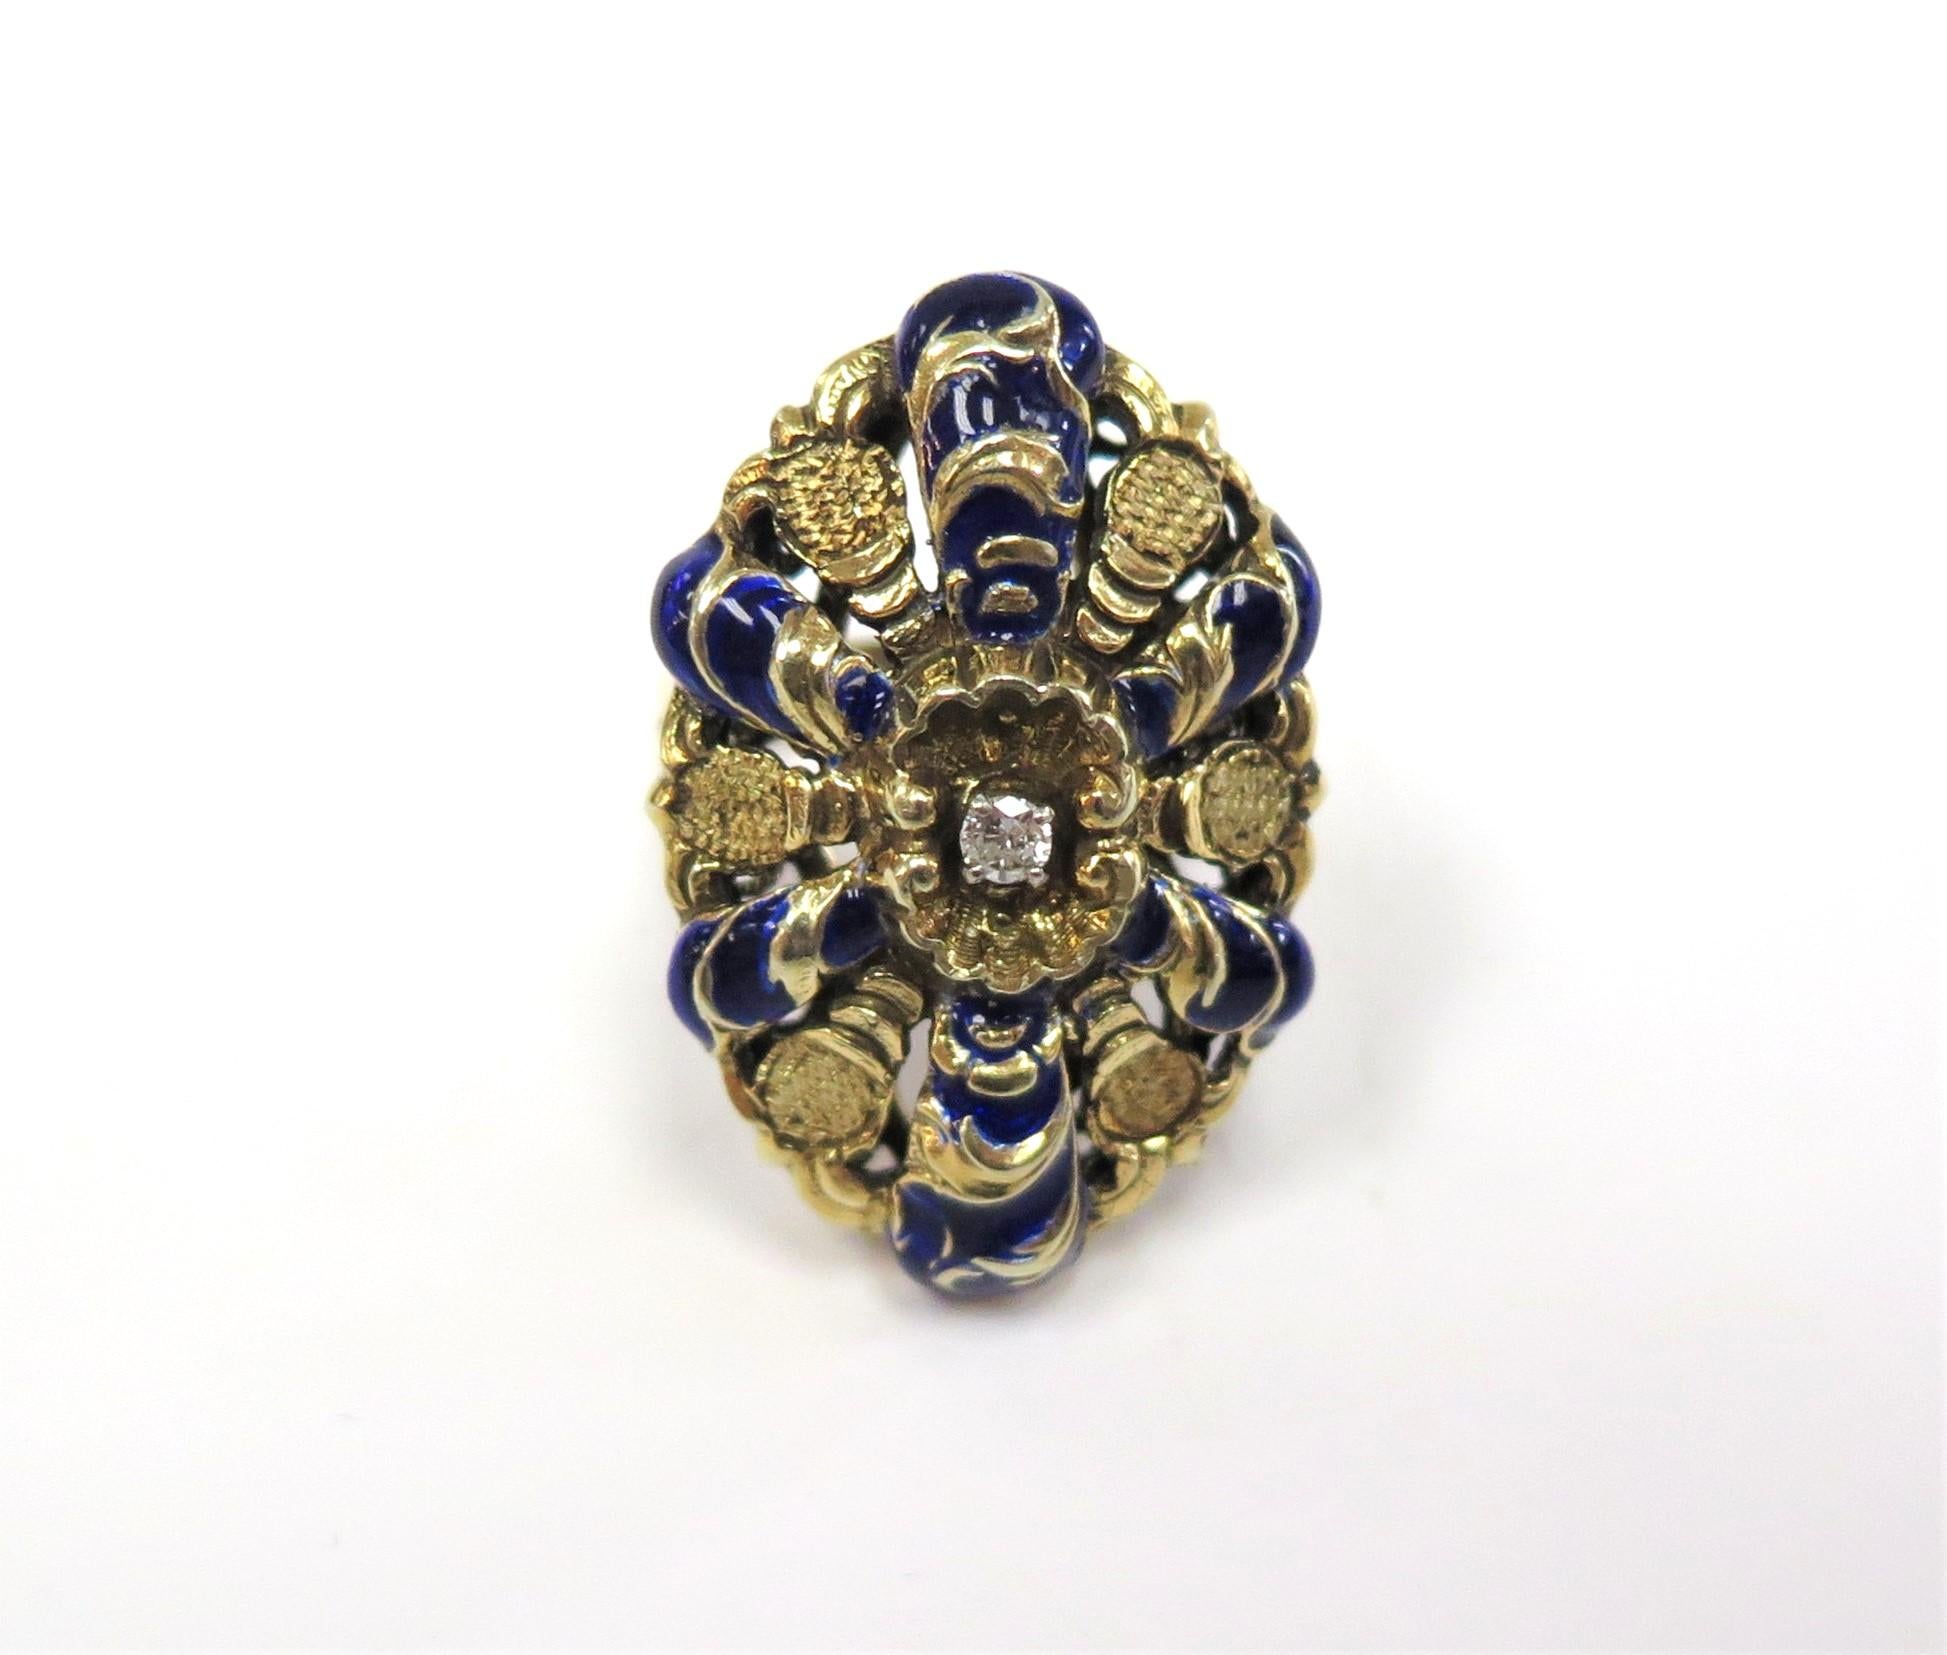 This is a stunningly regal and elegant antique Victorian ring whose blue enamel and 14 karat yellow gold create an utterly stunning color pop.

Circa 1880
Center Round Diamond: 0.07 Carat Clarity: VS/SI Color: G-H
size 7 - We can size it for you
